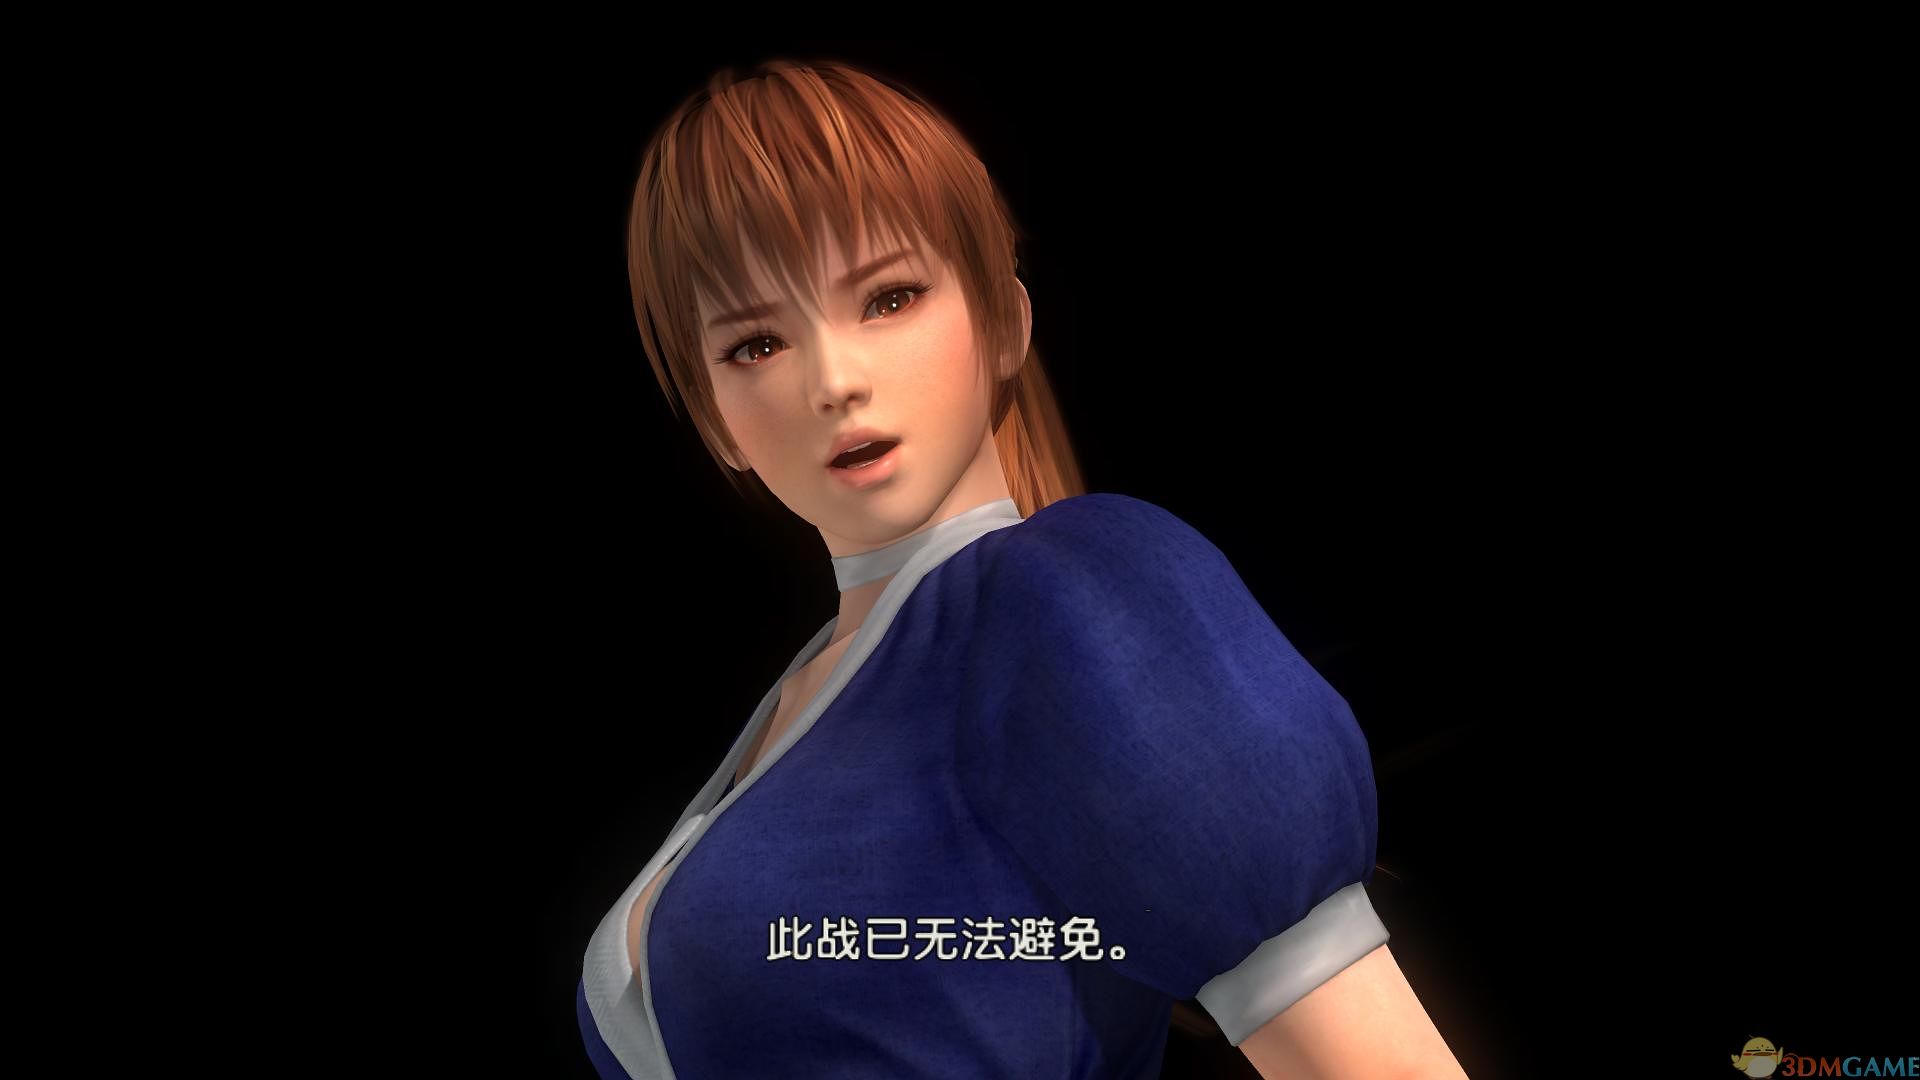 Christie - Dead or Alive 5 wallpaper - Game wallpapers - #26812